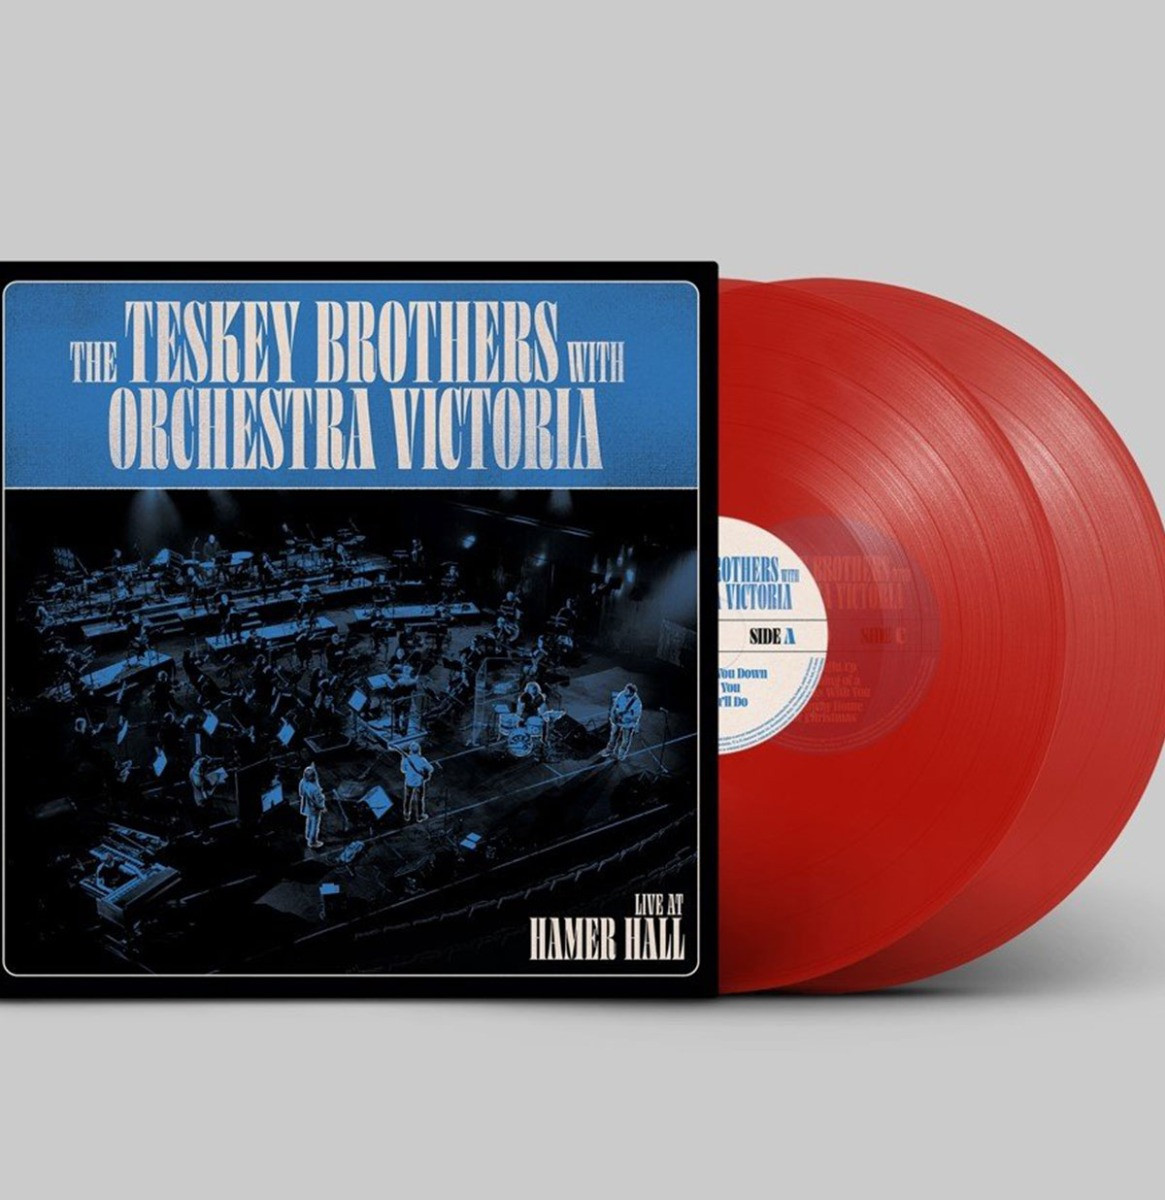 The Teskey Brothers With Orchestra Victoria - Live At Hamer Hall 2LP (Coloured Vinyl)